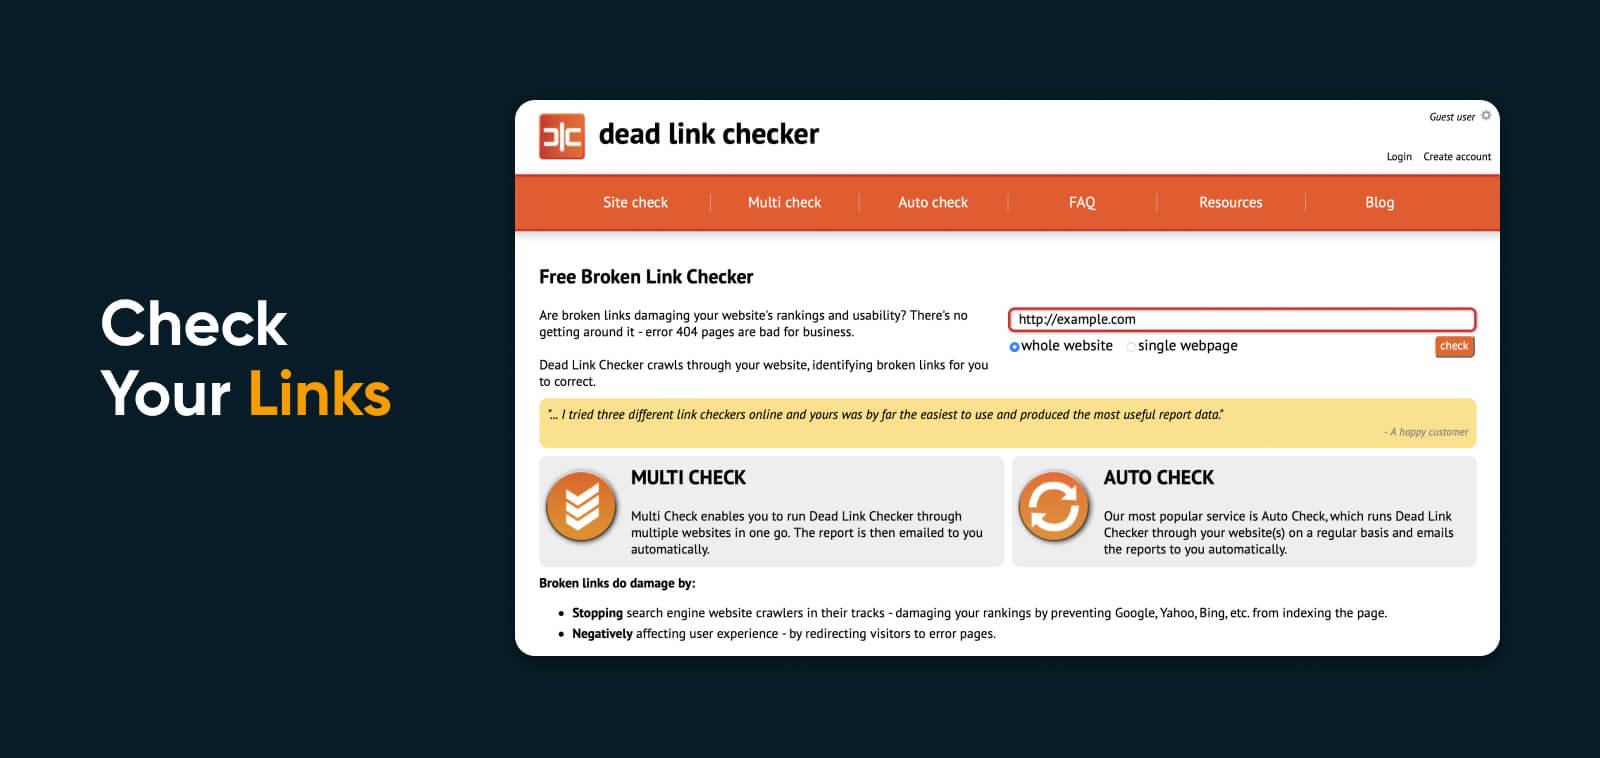 If visitors to your site consistently see 405 error codes, it might be because they are following a bad link. You can check your site using the Dead Link Checker or a similar free tool.